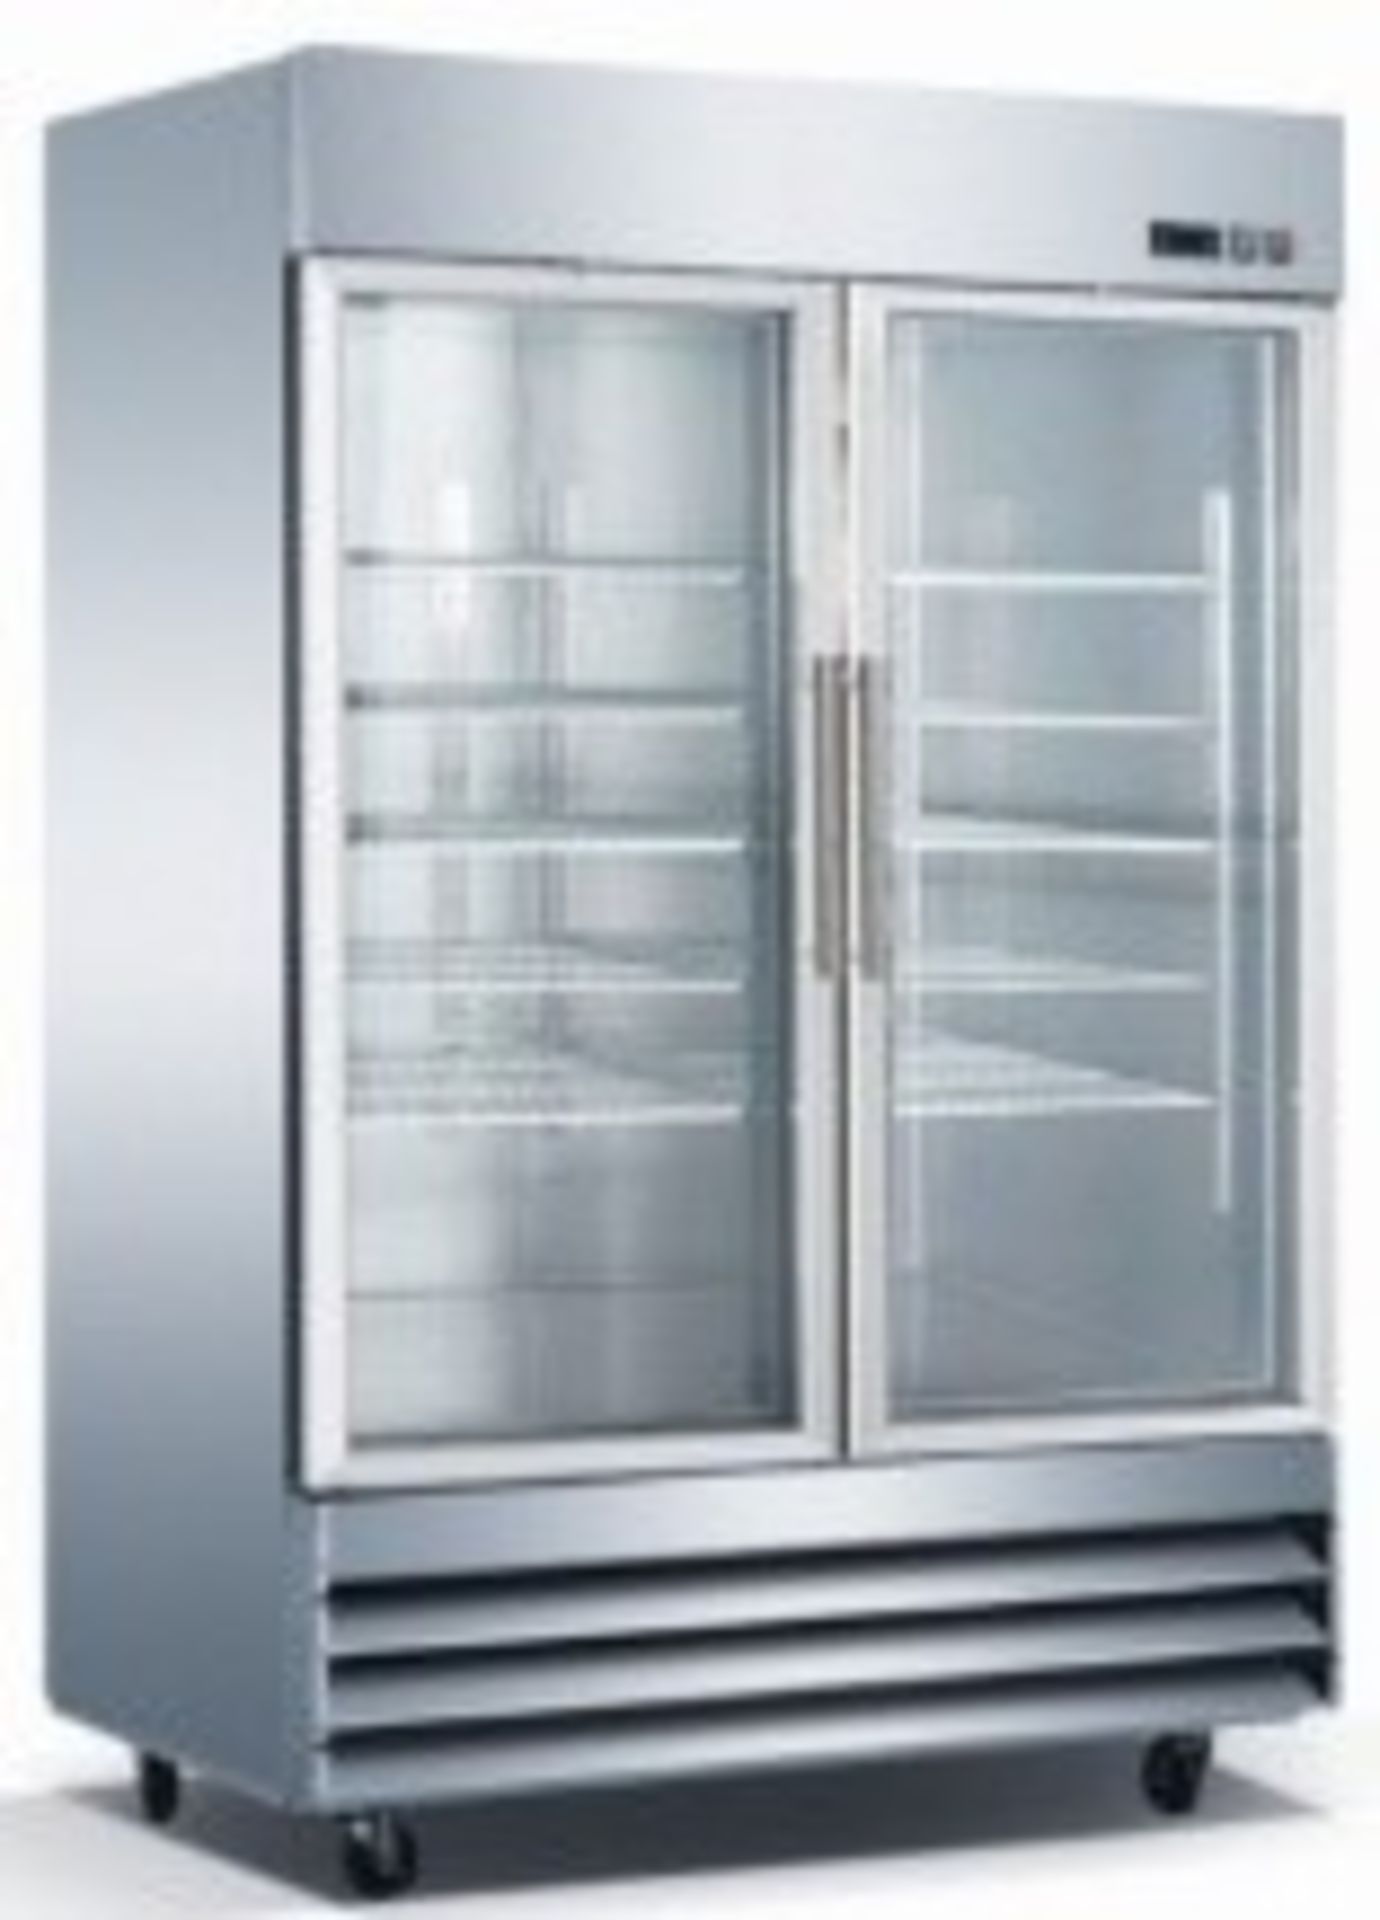 EQ Stainless Steel Reach-In Refrigerator 349 Gal, Silver Model #:CFD-2RR-GEHC L*W*H (inch): 54*32.